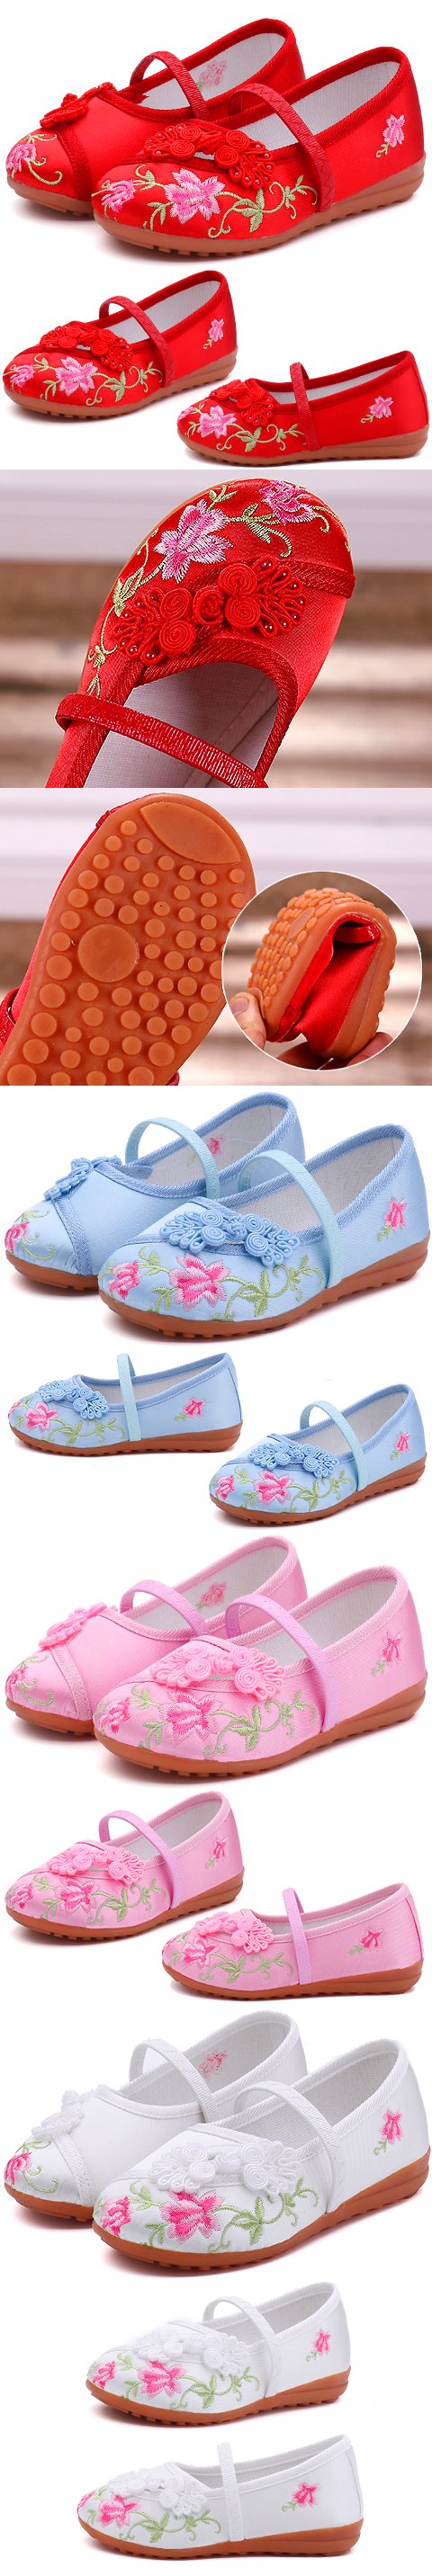 Girl's Flower Embroidery Shoes (Multi-color)